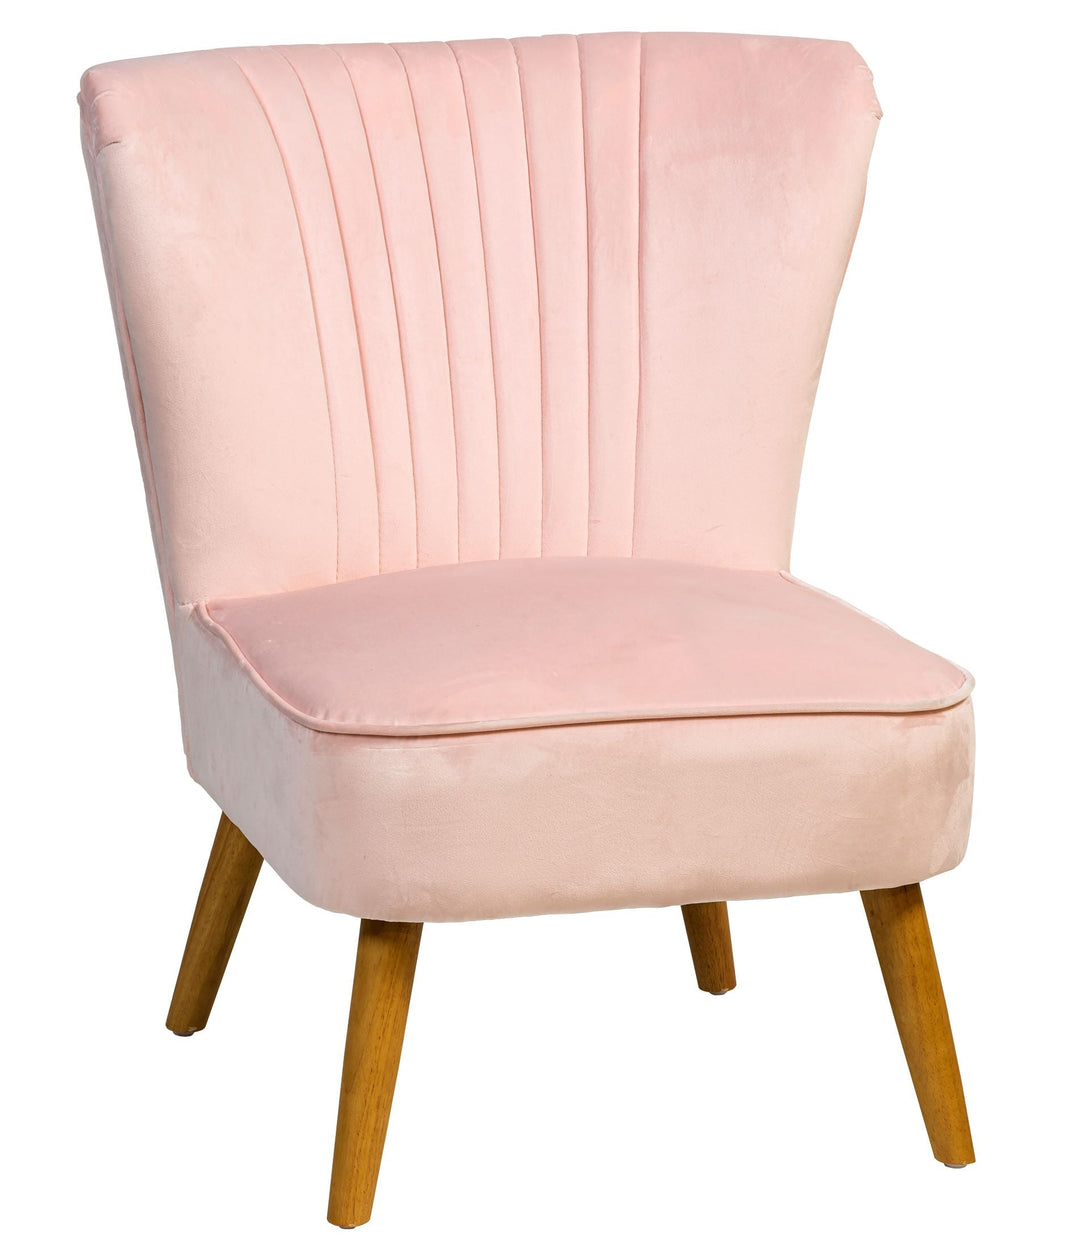 Shell chair pink